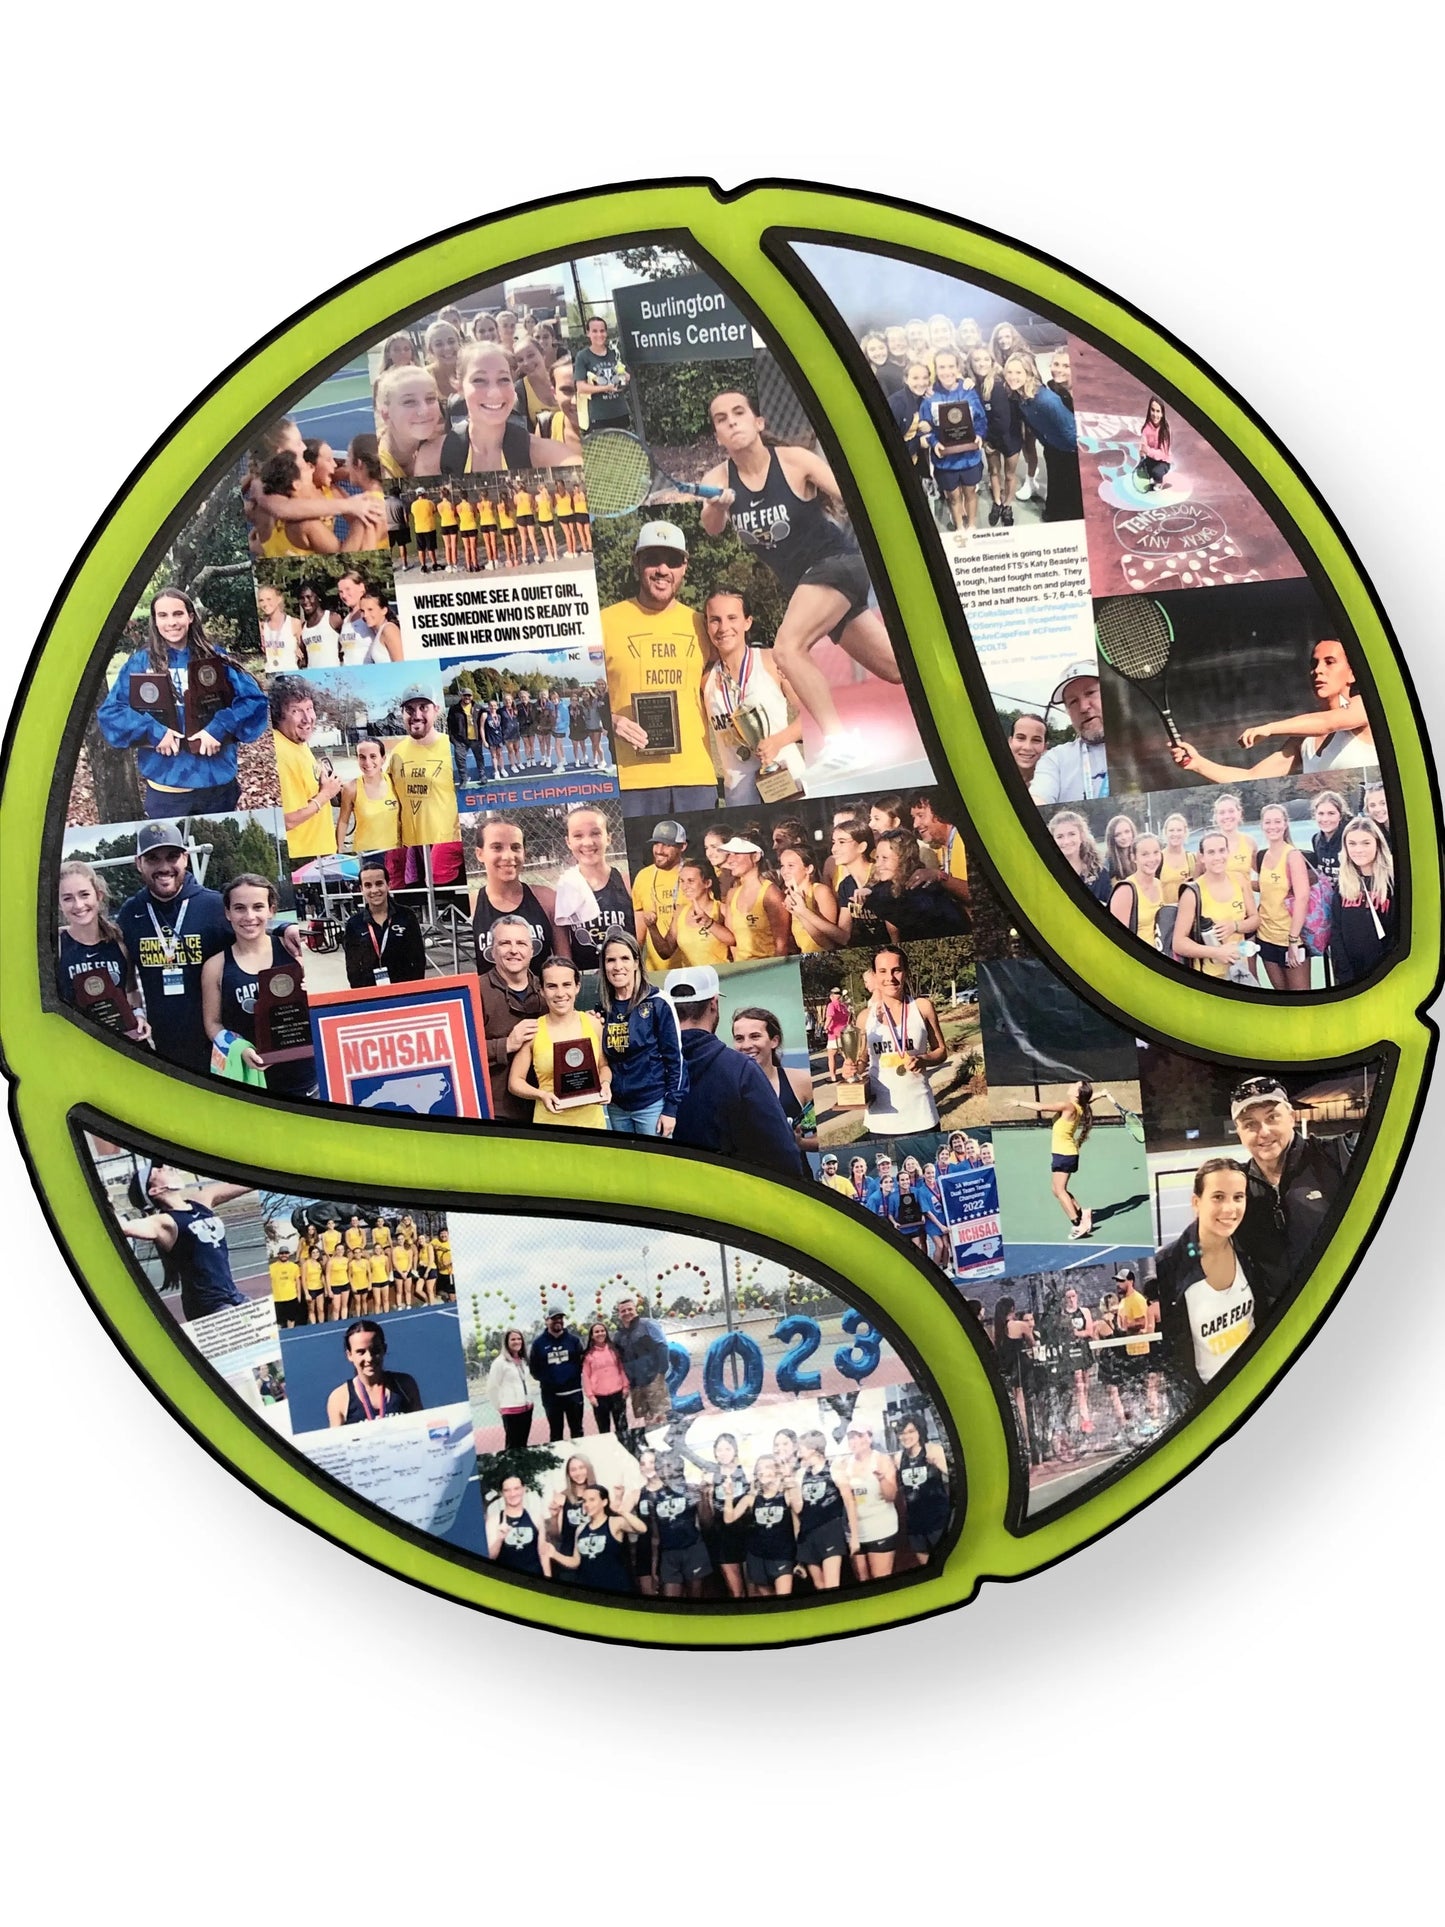 unique tennis gifts for her, special senior night tennis gift idea!